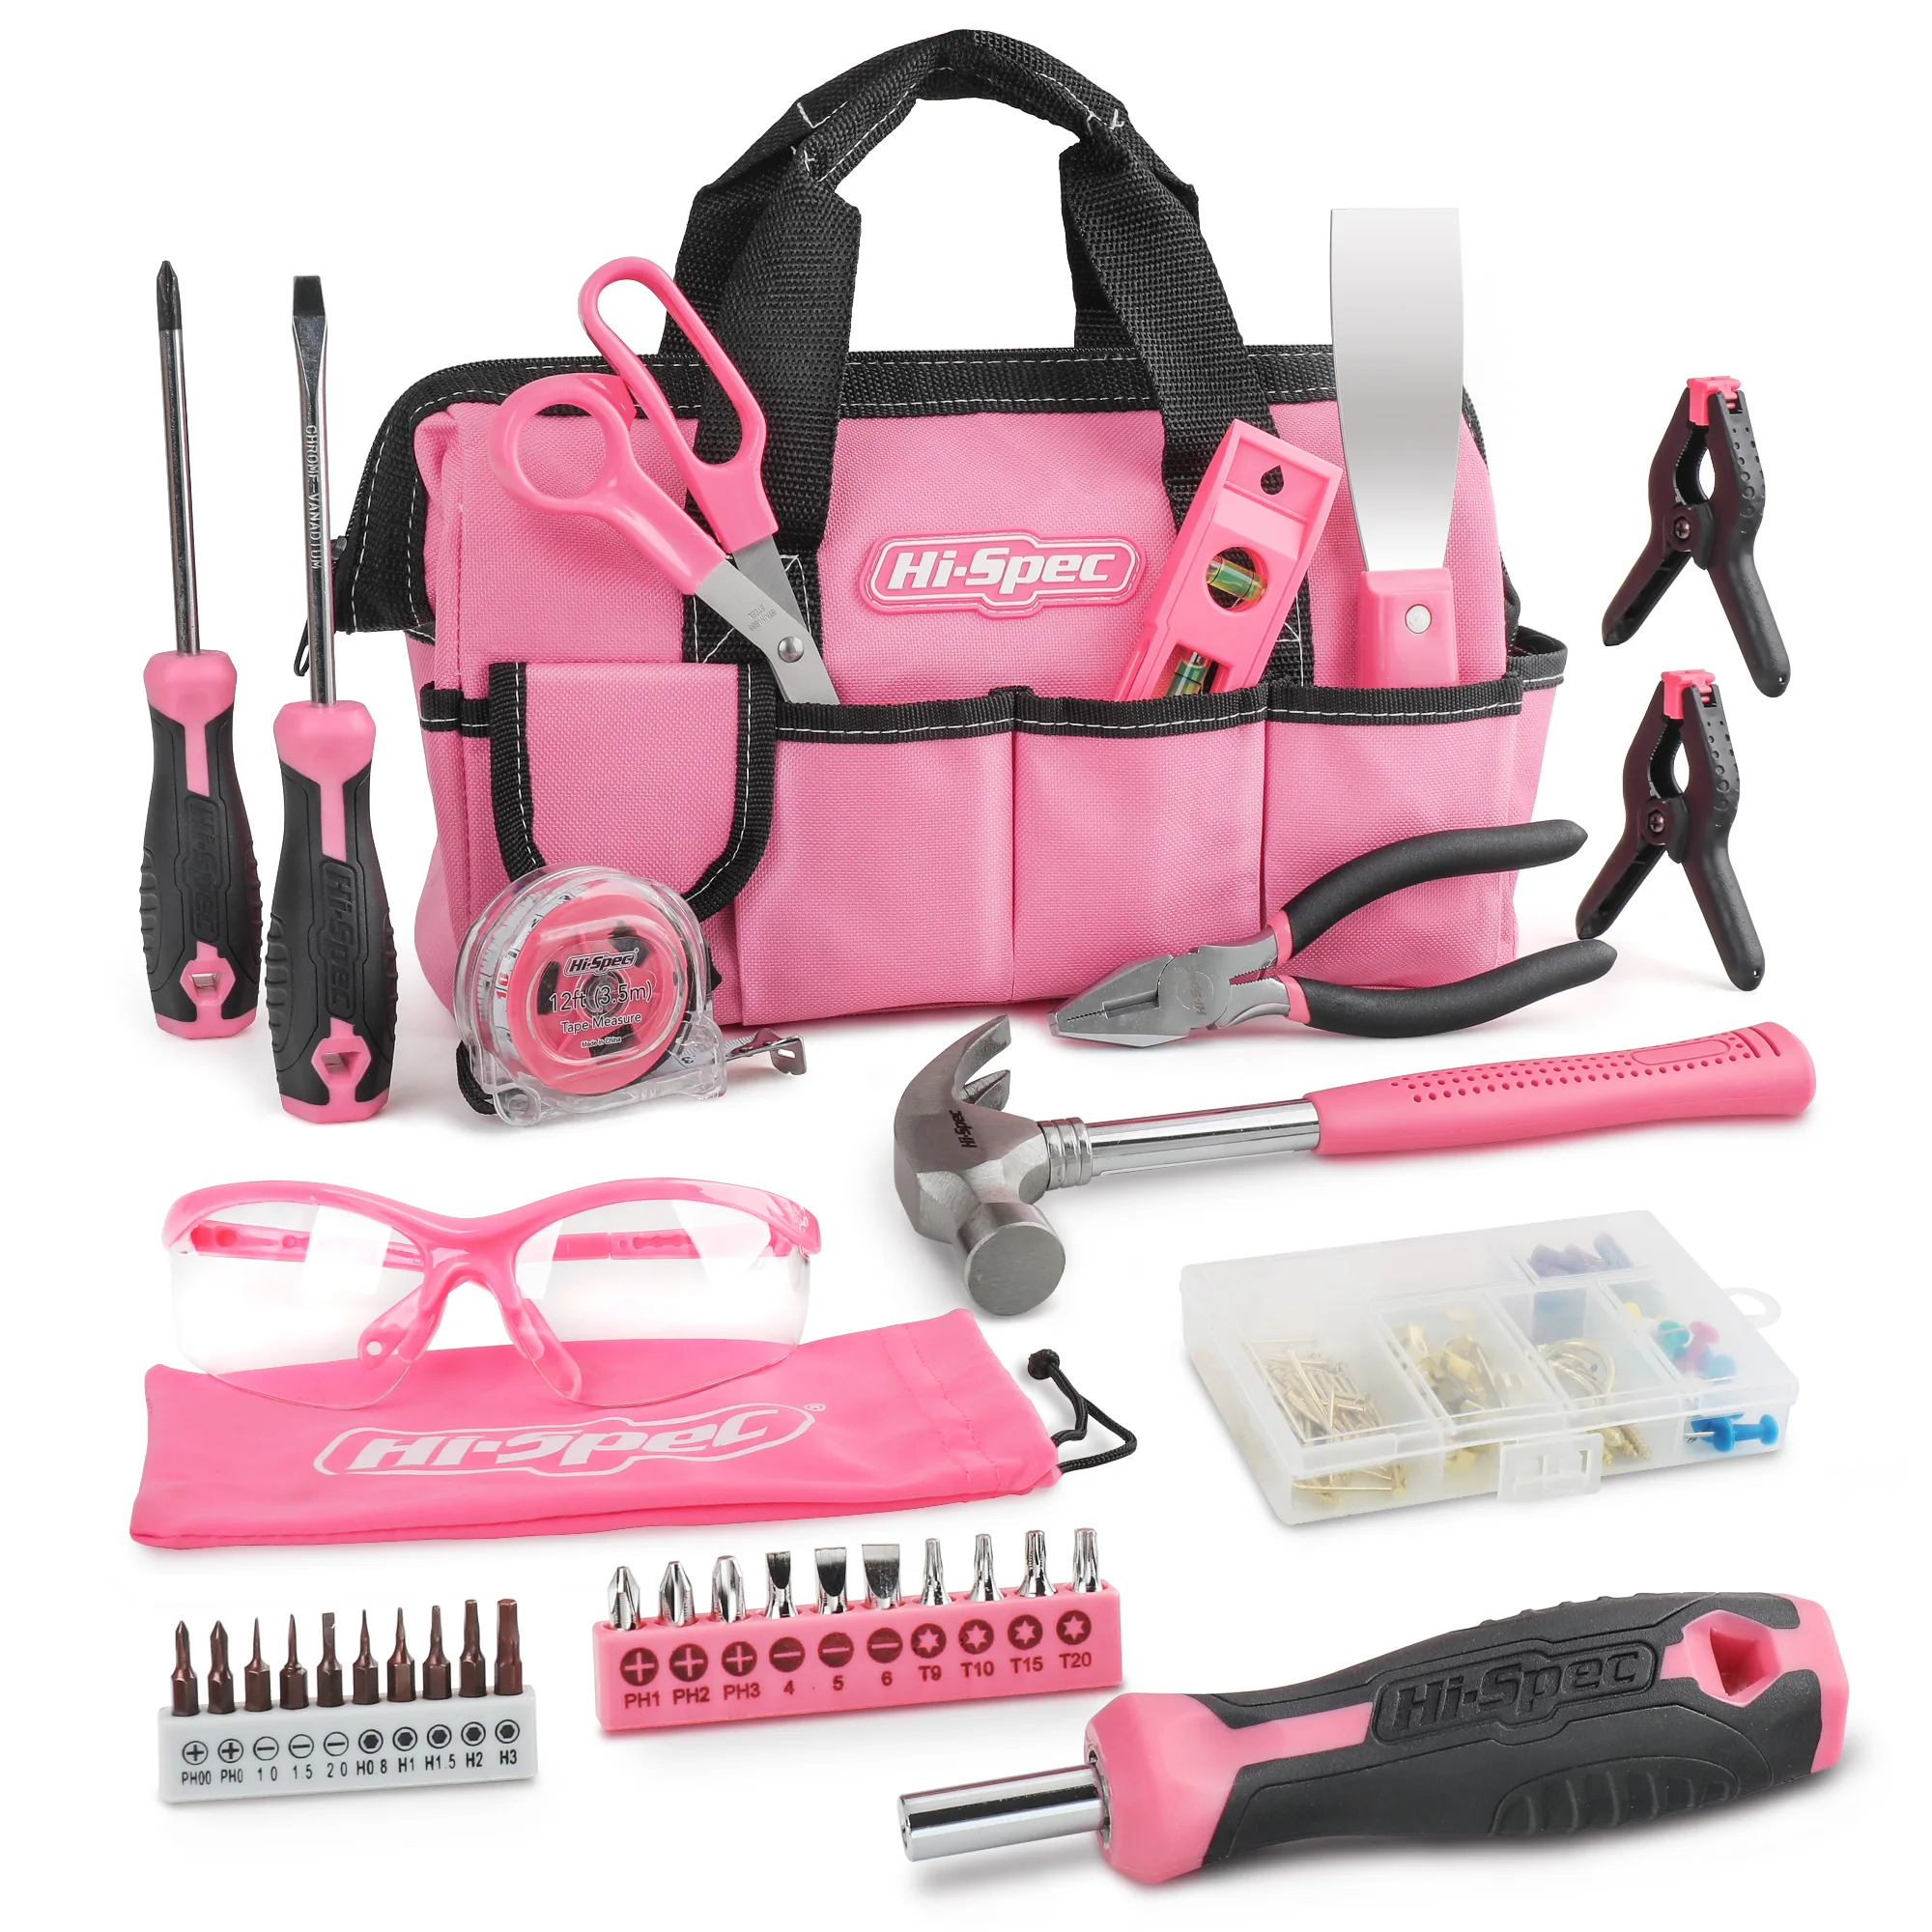 Hi-Spec Household Tool Set 30 Piece Pink Home Tool Kit Tool Bag for Women Girls With Prescision Screwdrivers Pliers Hammer enlarge